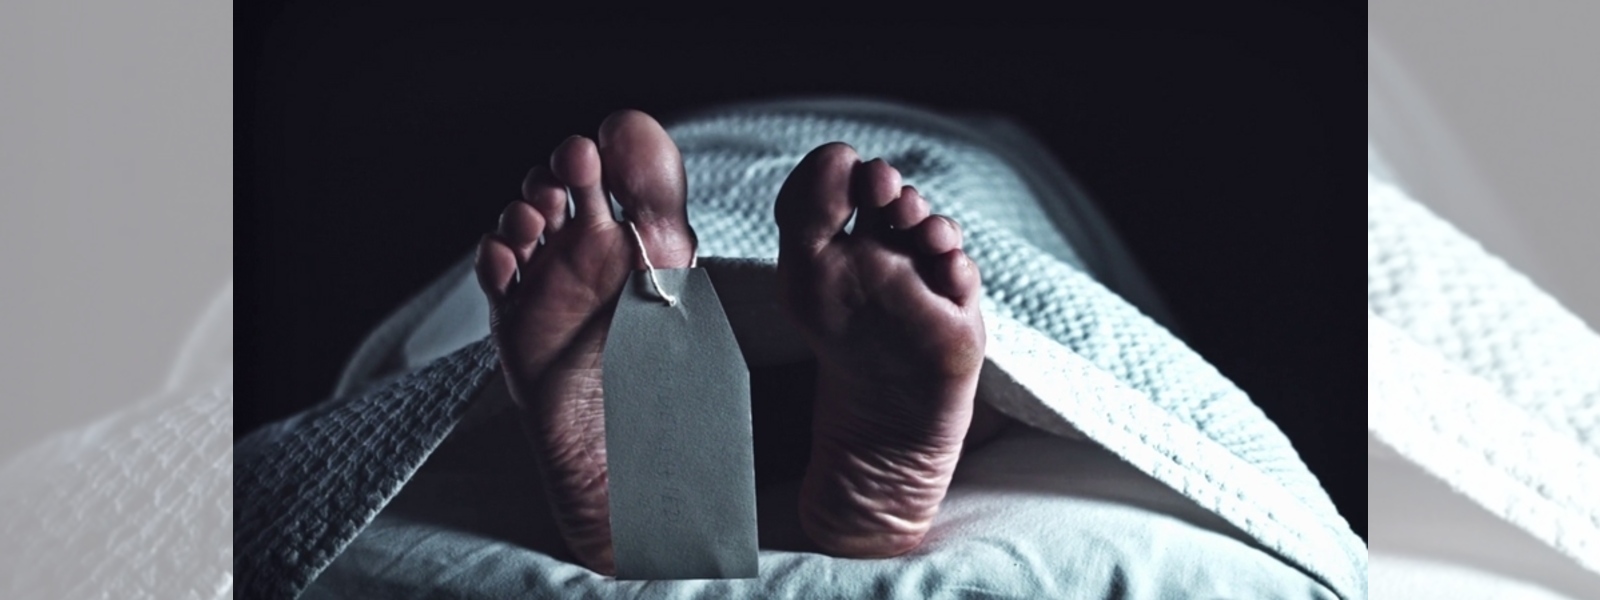 42-year-old man clubbed to death in Ambalangoda